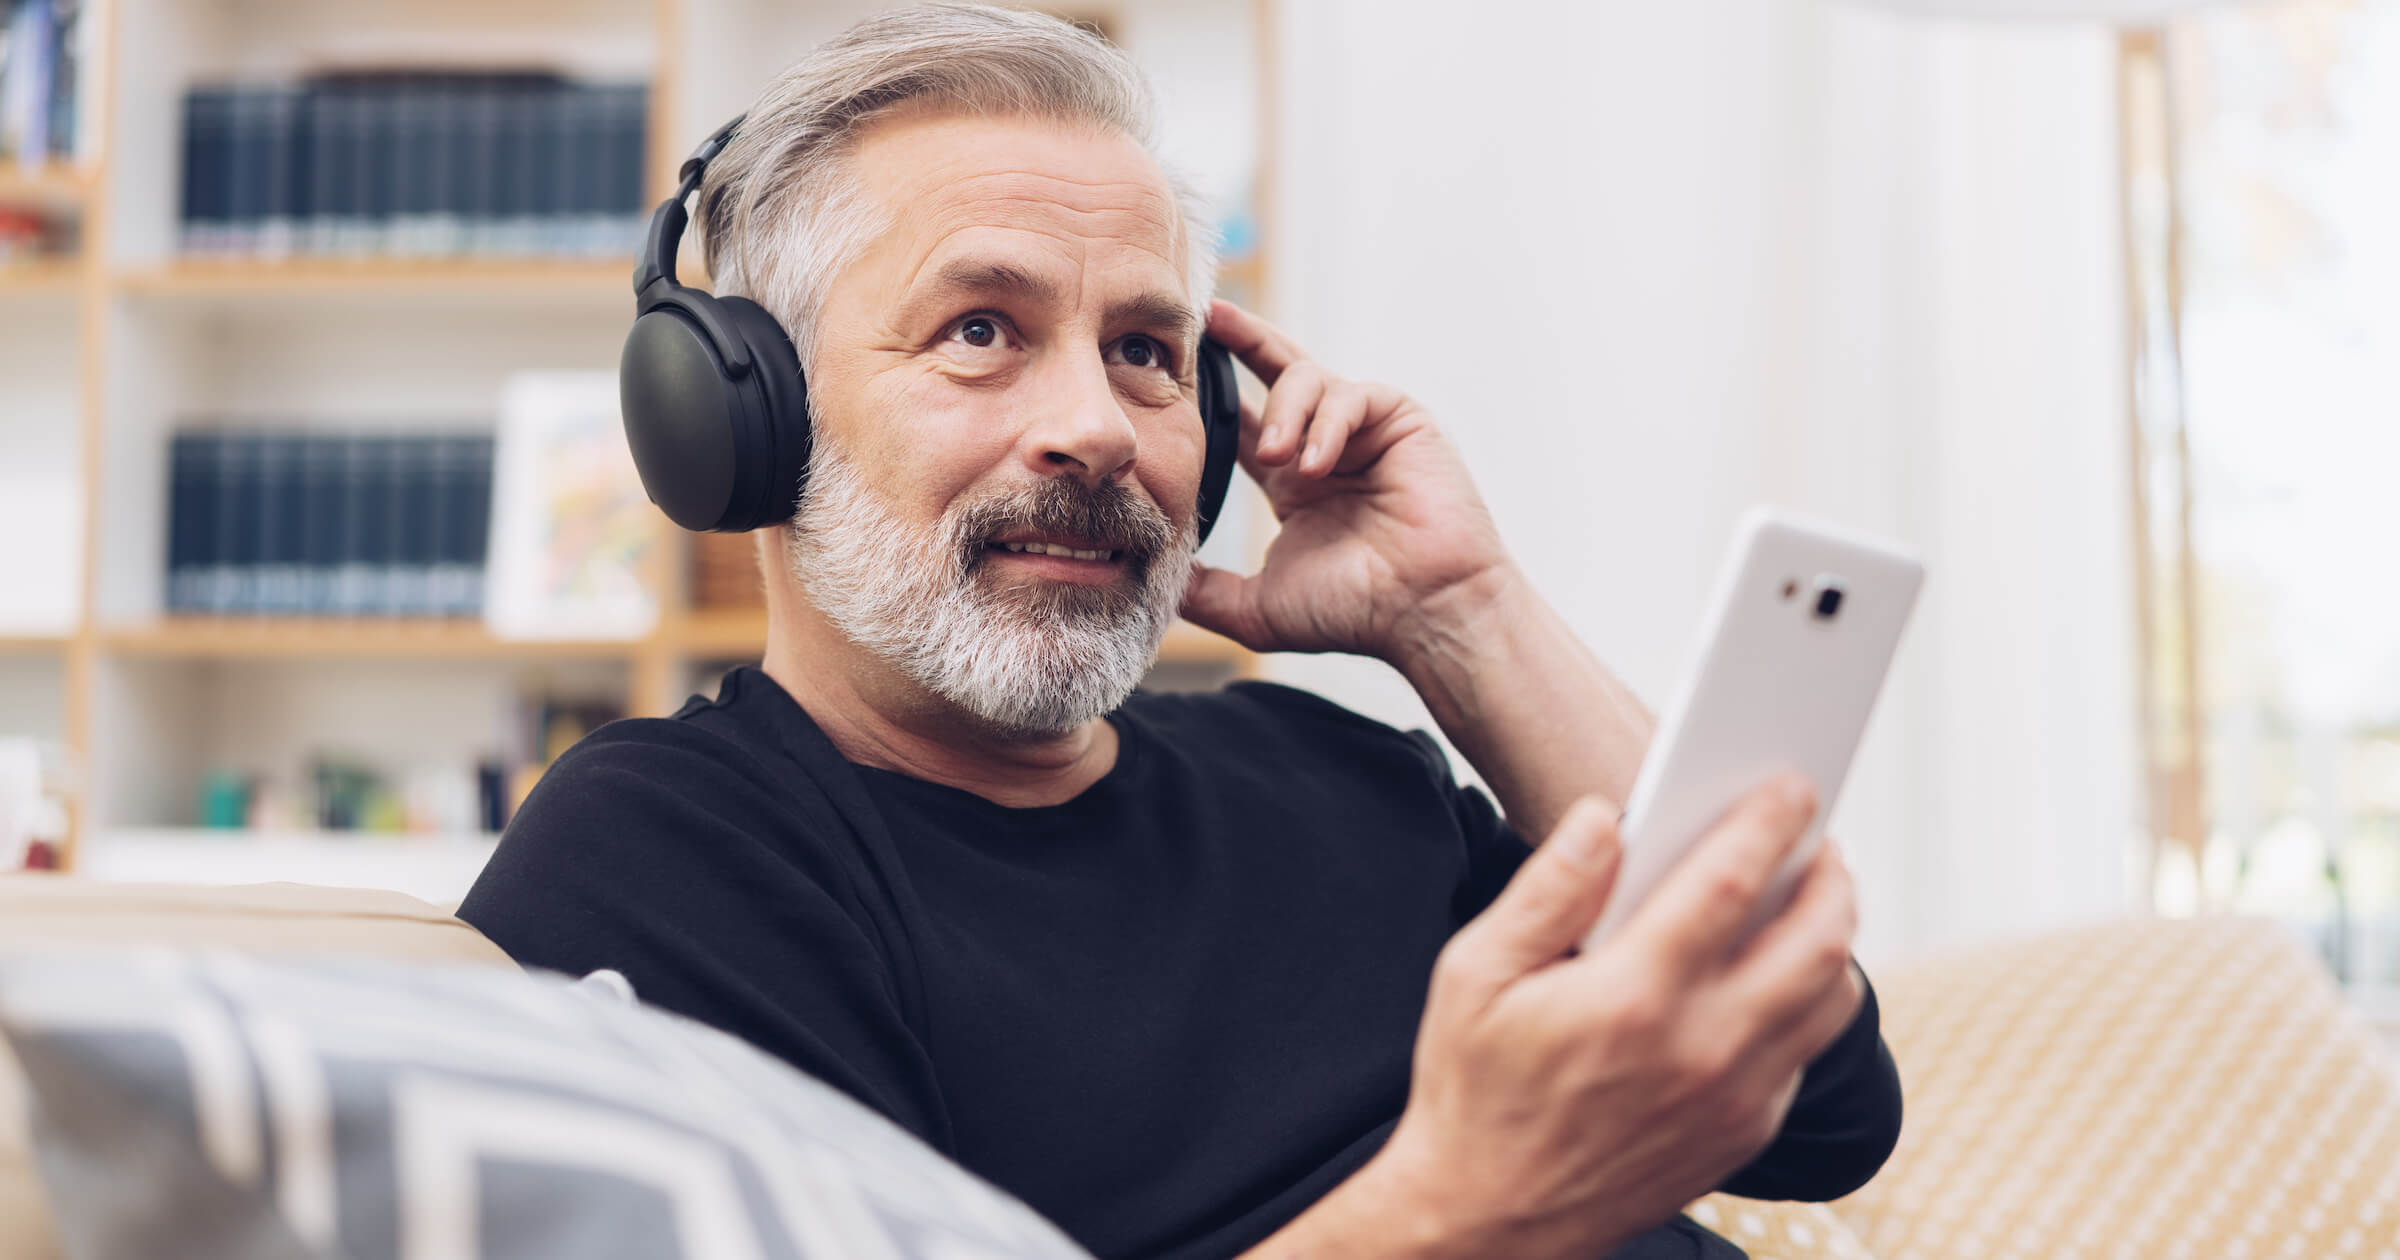  Man with headphones listening to a podcast on his phone